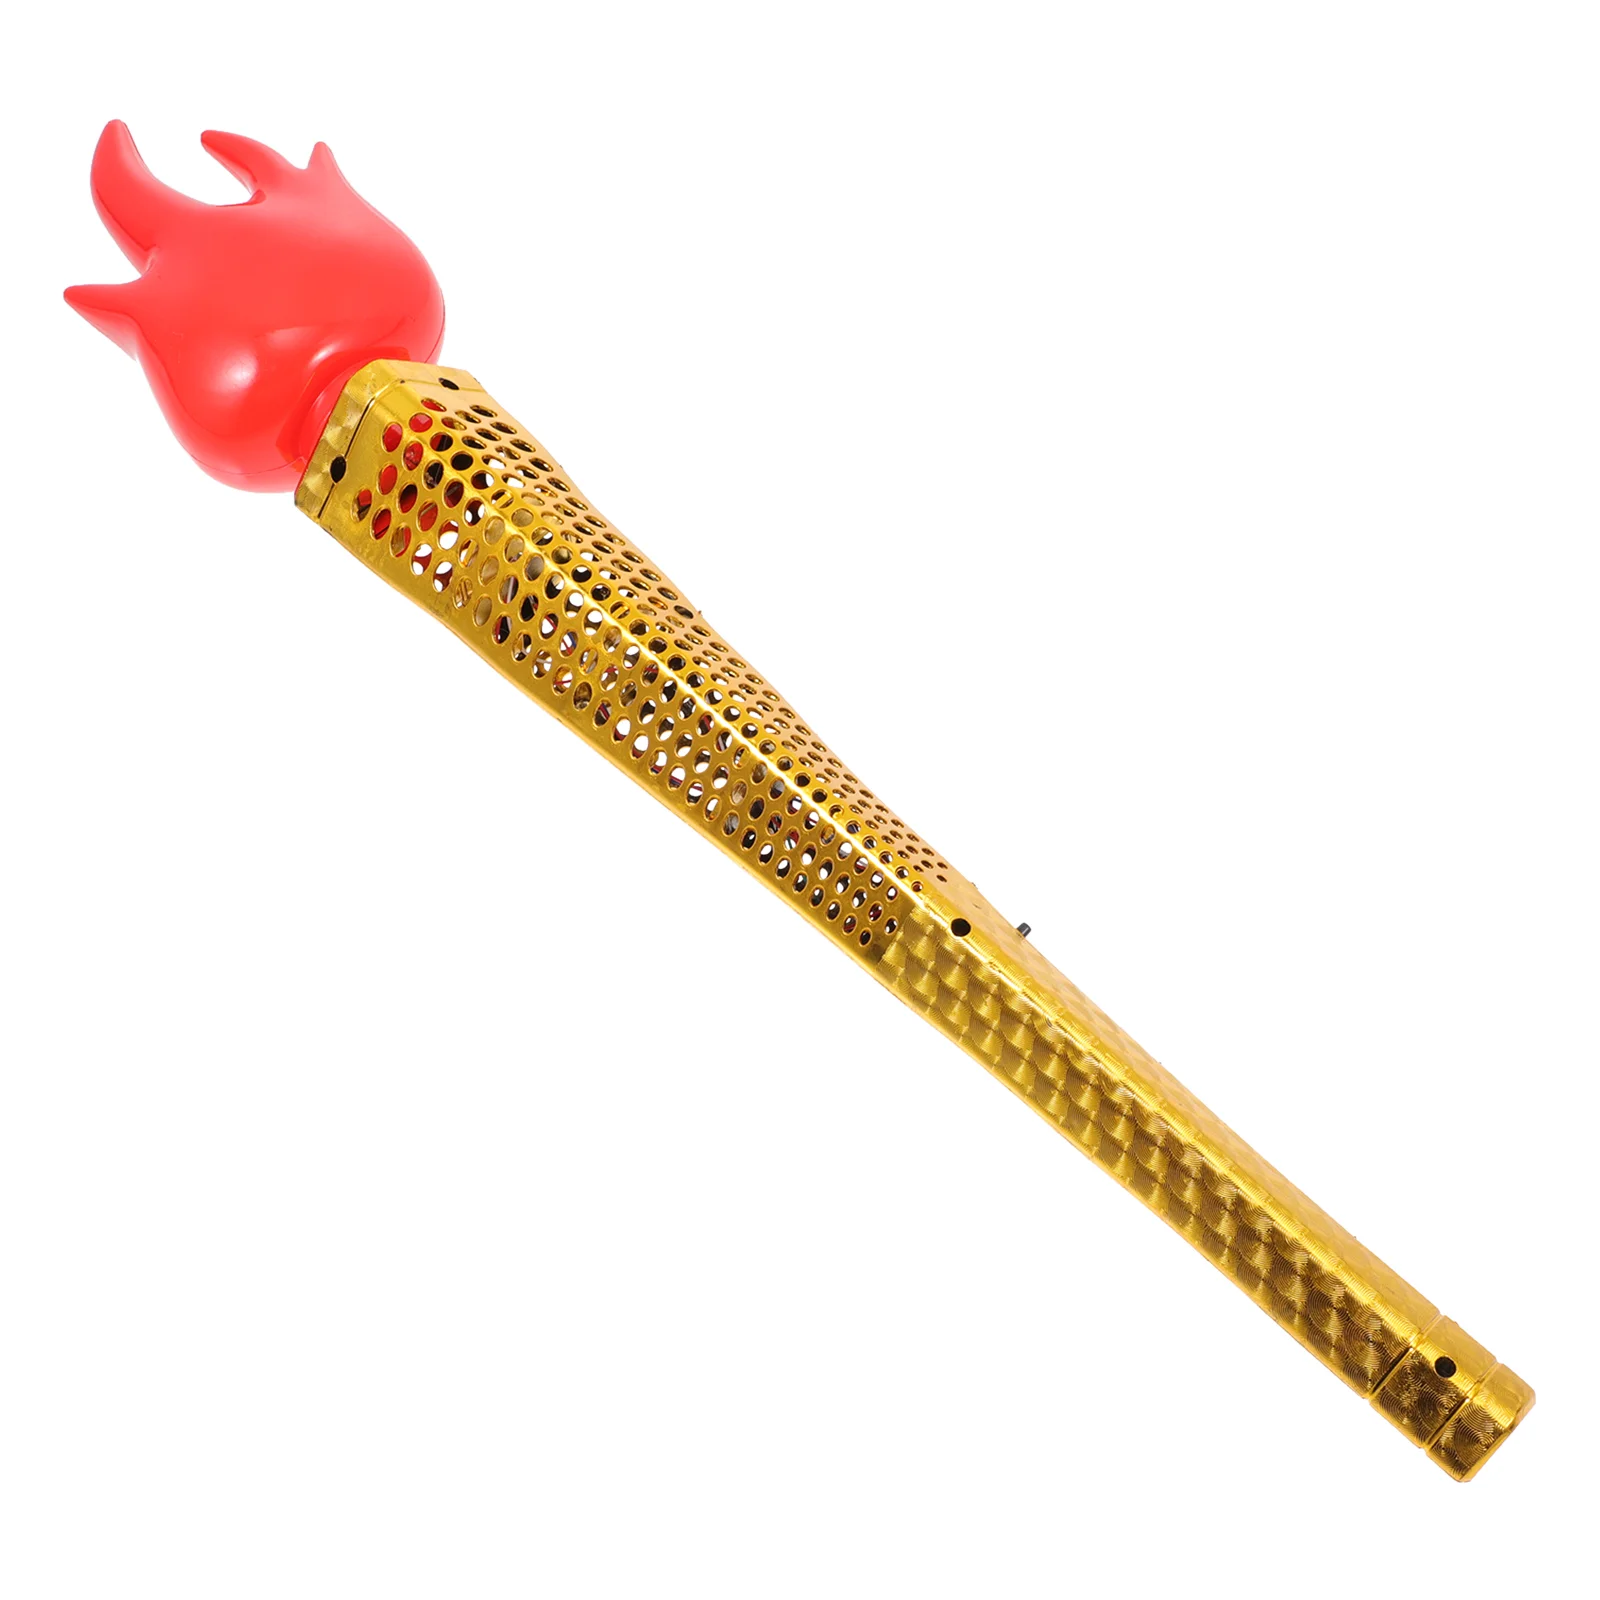 

Torch Torches Toy Fake Fire Flame Kids Party Inflatablecampfire Plaything Glowing Artificial Supplies Fun Simulation Prop